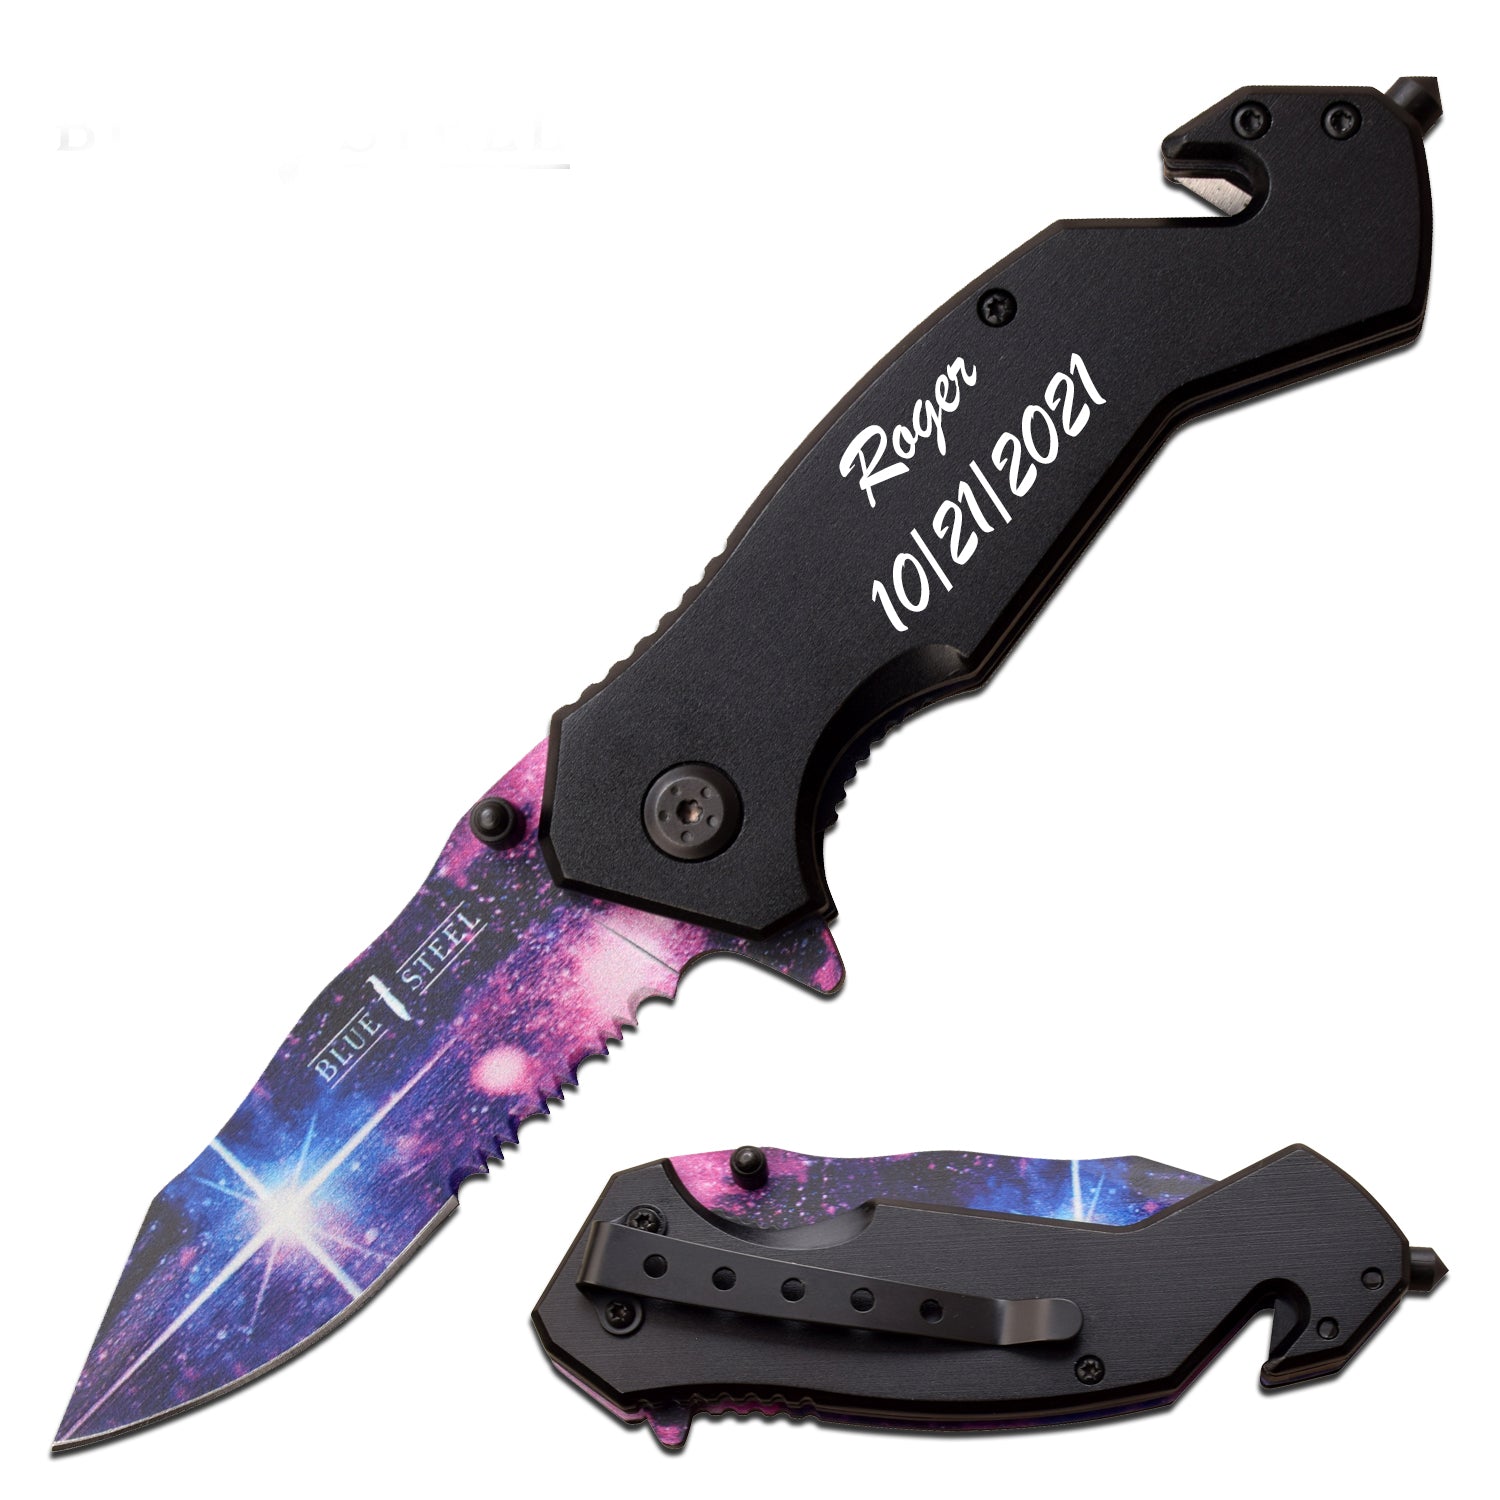 GIFTS INFINITY Customizable 7.25" Pocket Knife Car Window Breaker and Seat Belt Cutter with Belt Clip, Rescue Knife